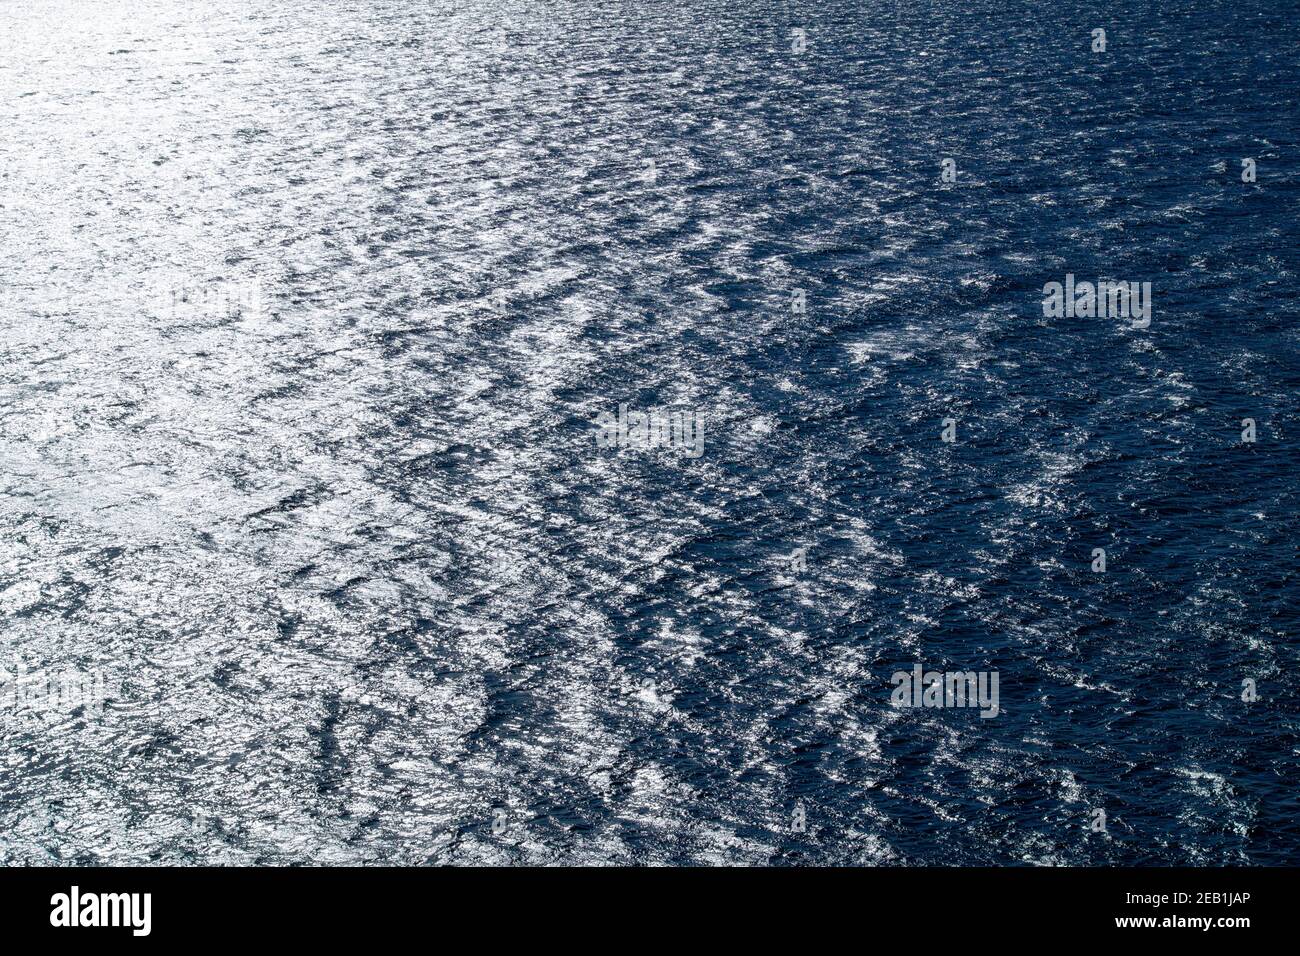 Photograph for background material of the wide sea surface that glitters in the sunlight Stock Photo